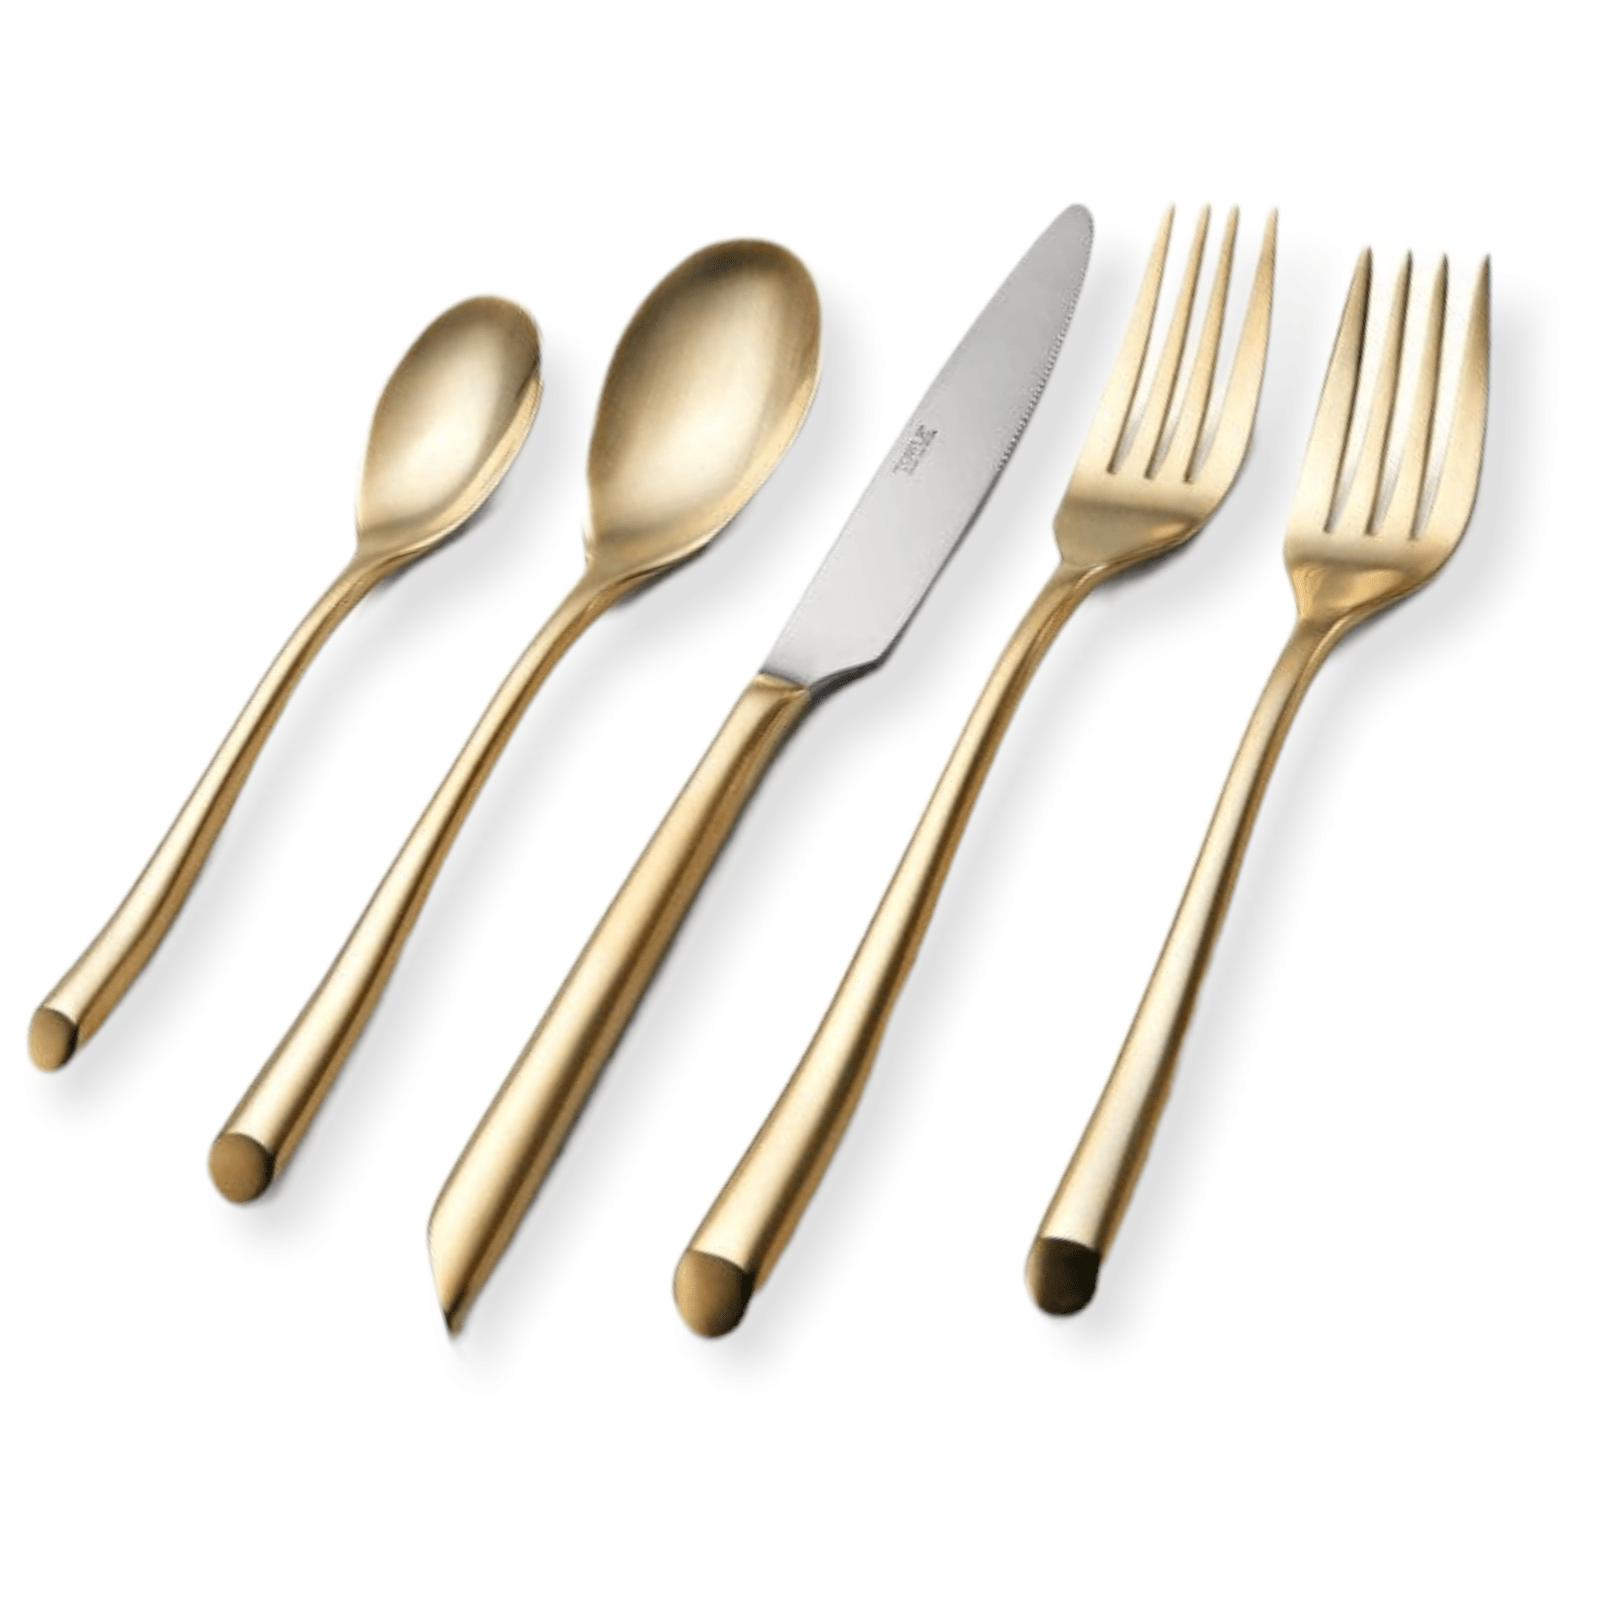 20pc Forged Gold Plated Flatware Set - Exquisite Designs Home Décor 